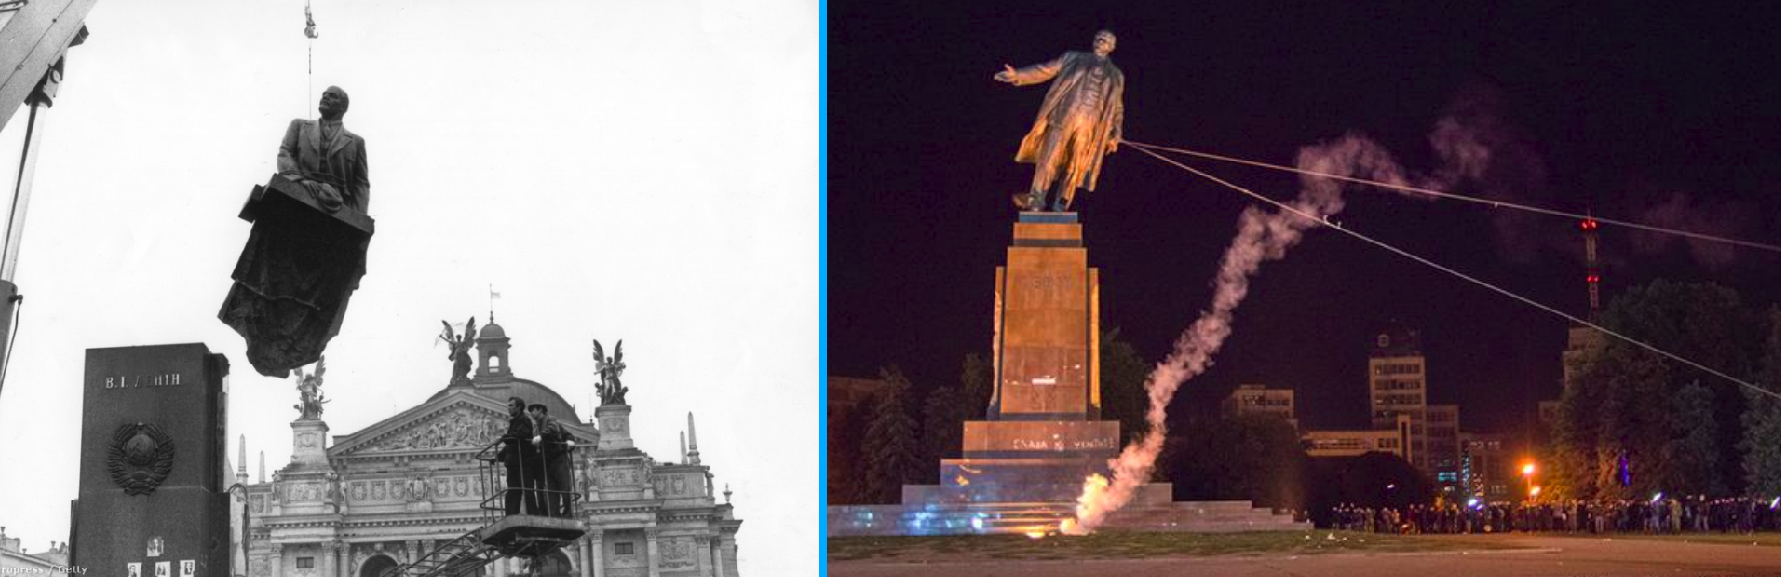 Removal of communist monuments started in Ukraine in 1990, when Lenin was removed from central square in Lviv, (left) and largely finished during the 2014 Revolution of Dignity, when it was removed from central square in Kharkiv (right). ~